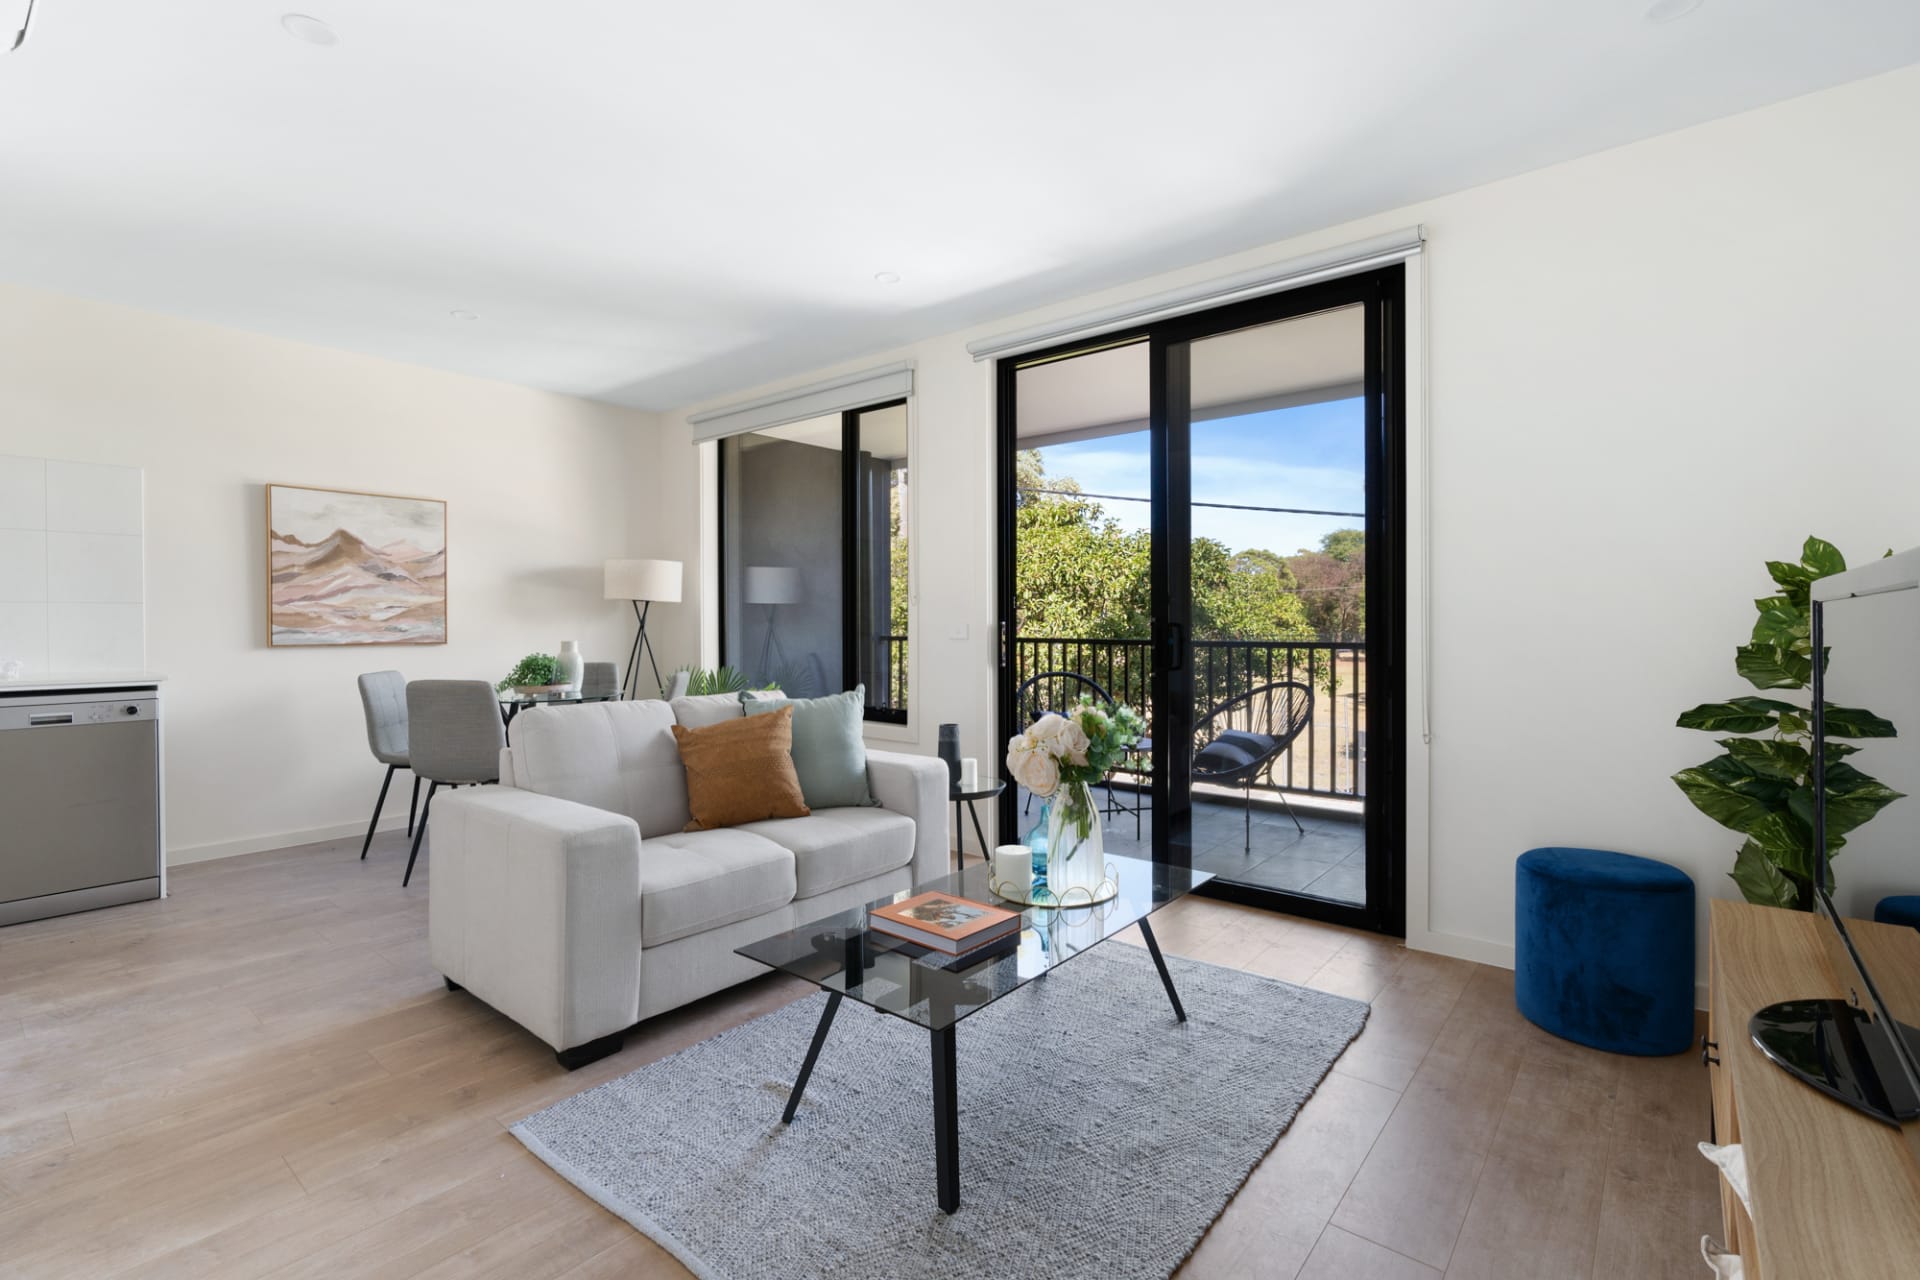 Blending into the surrounding environment: A look inside Heidelberg West's Liberty apartments